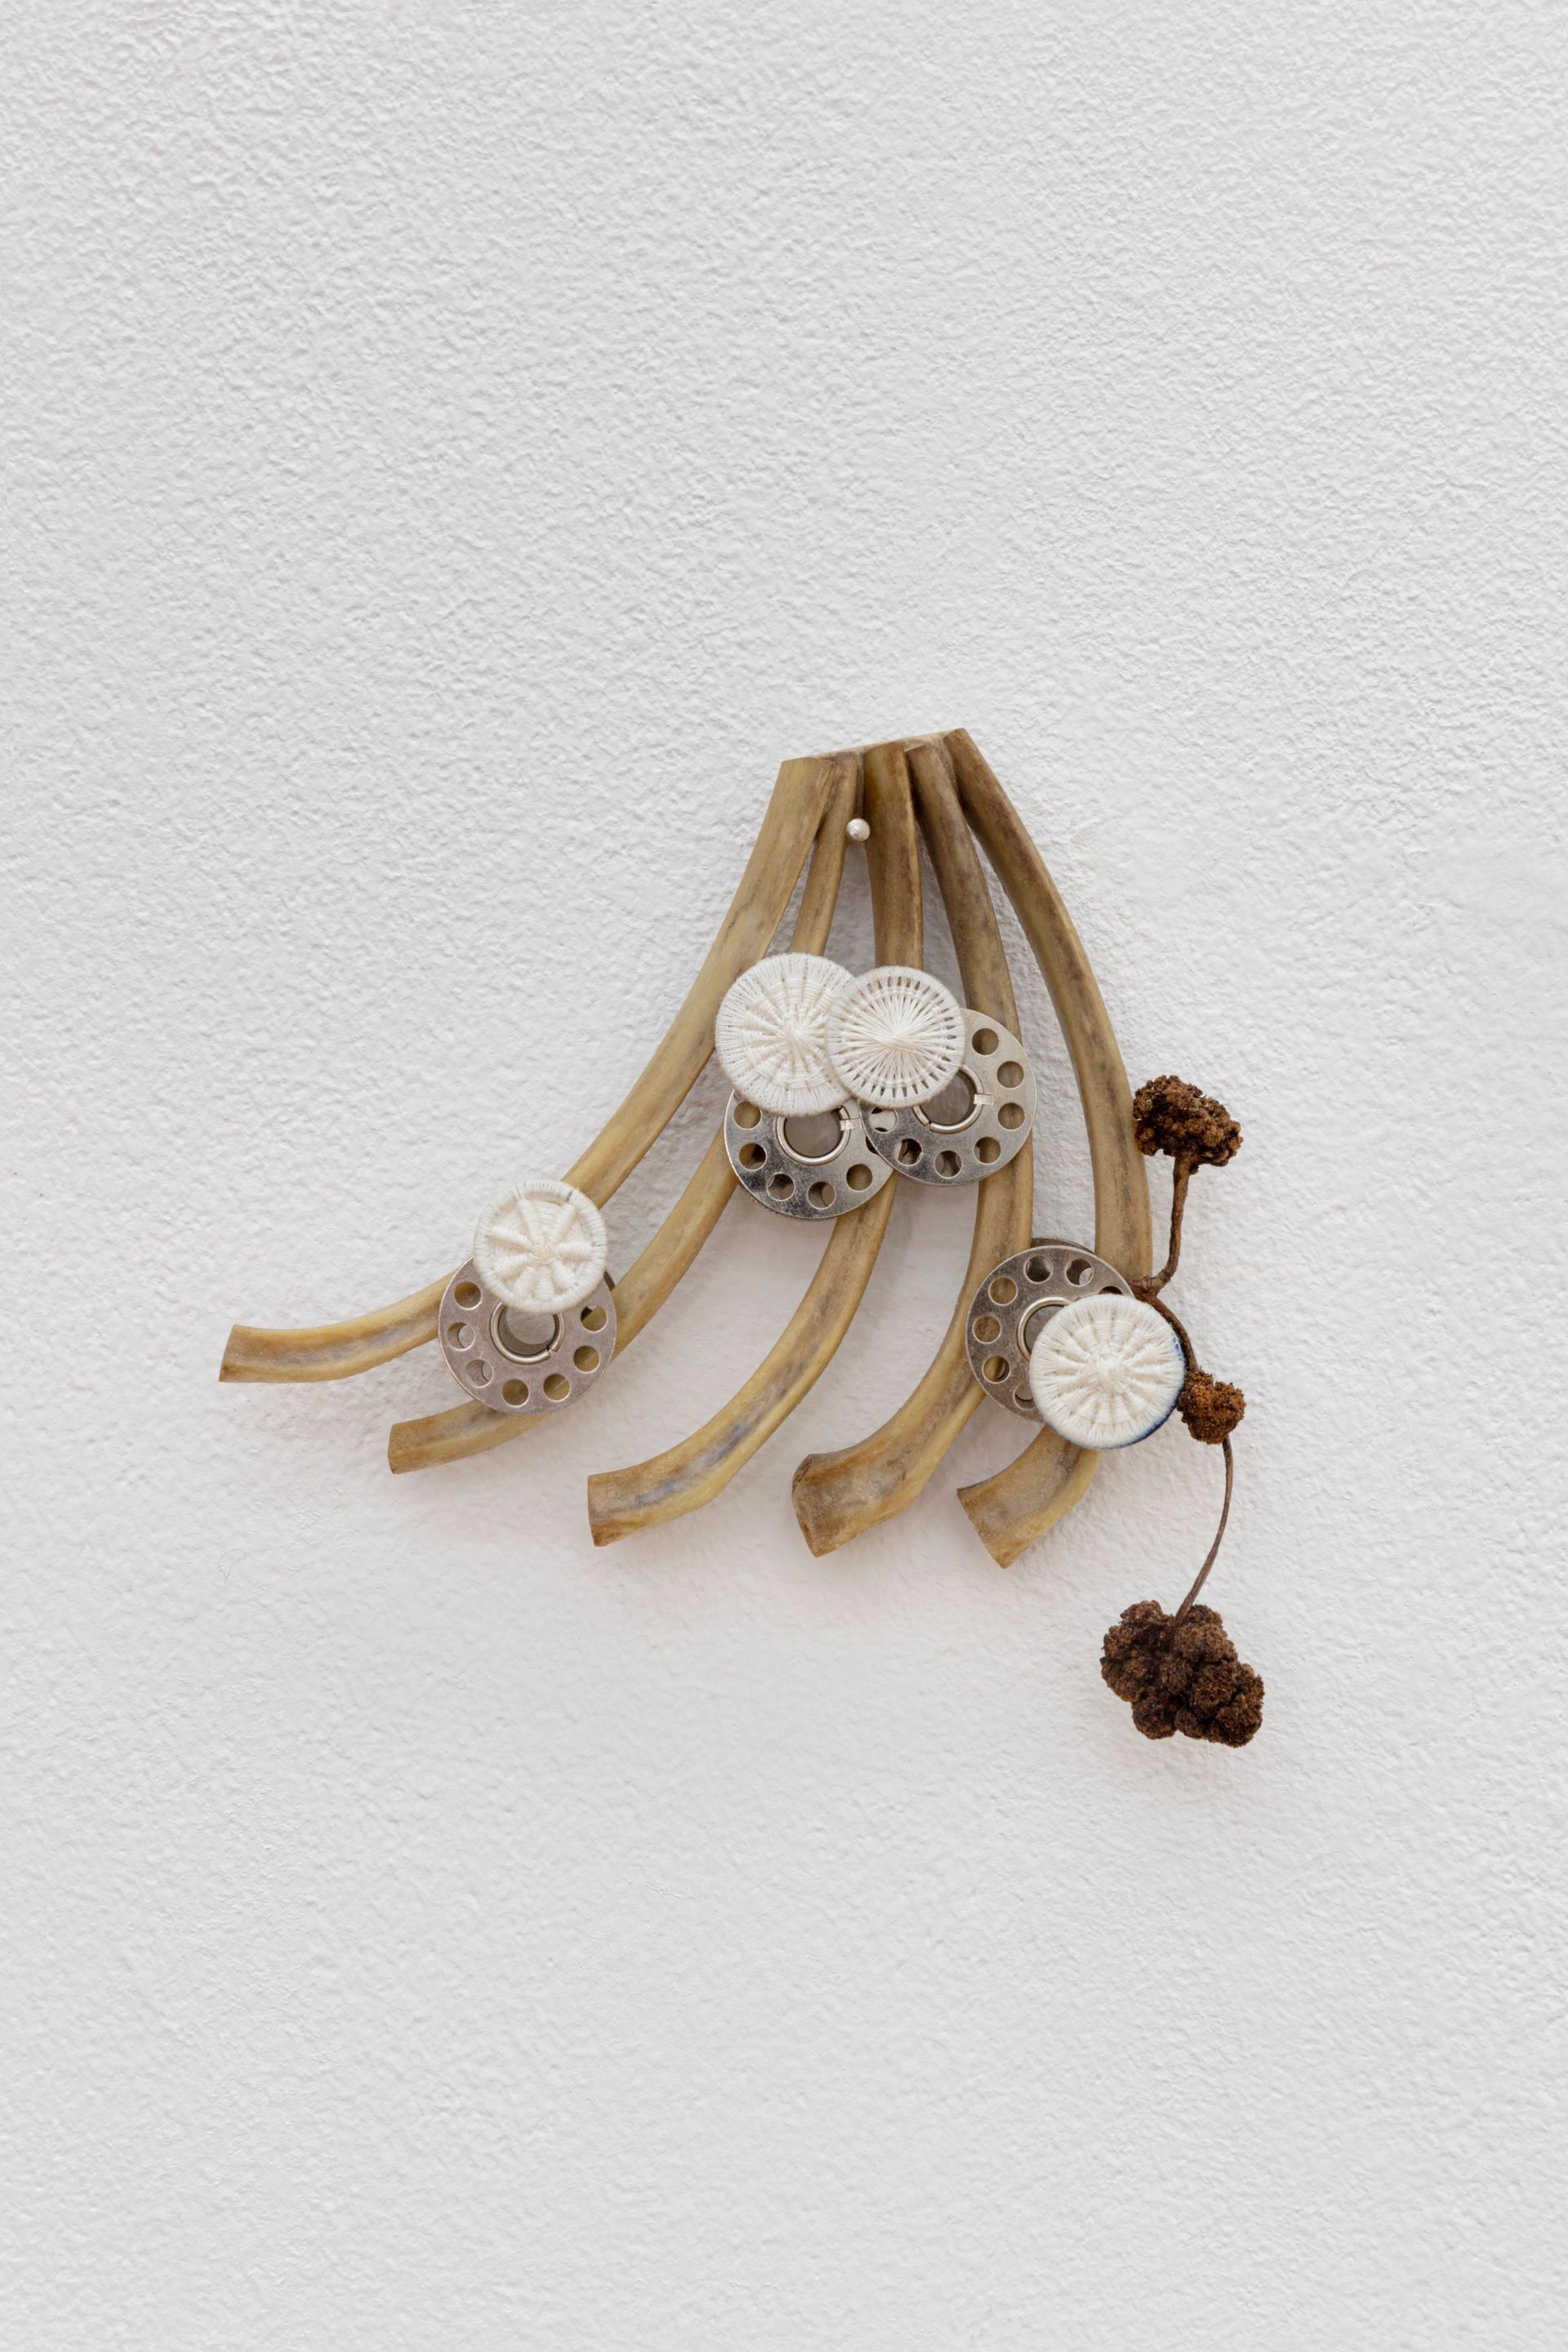 David Fesl, Untitled, 2021, lamb ribs, sewing machine coils, cotton thread, bedcloth buttons, ink and willow blossoms, 11 × 12.6 × 3.3 cm, photo: Sebastian Kissel 